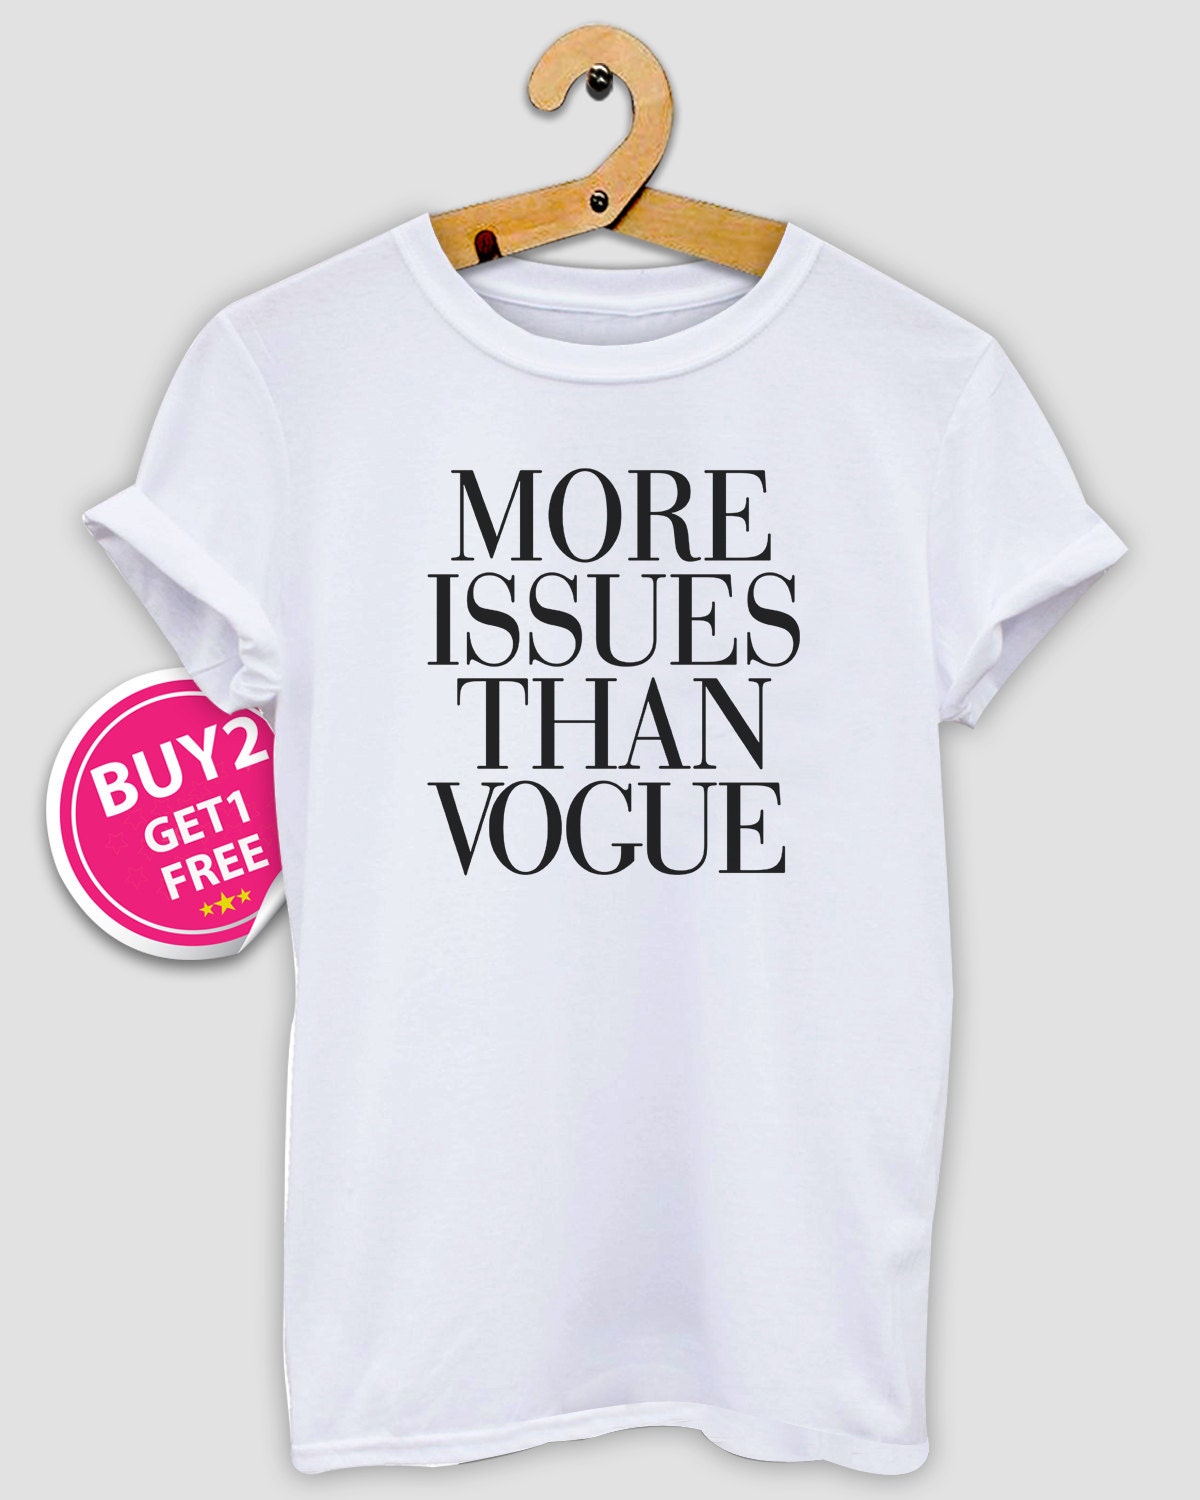 More issues than vogue Shirt T Shirt Unisex Size by llSKYLinell